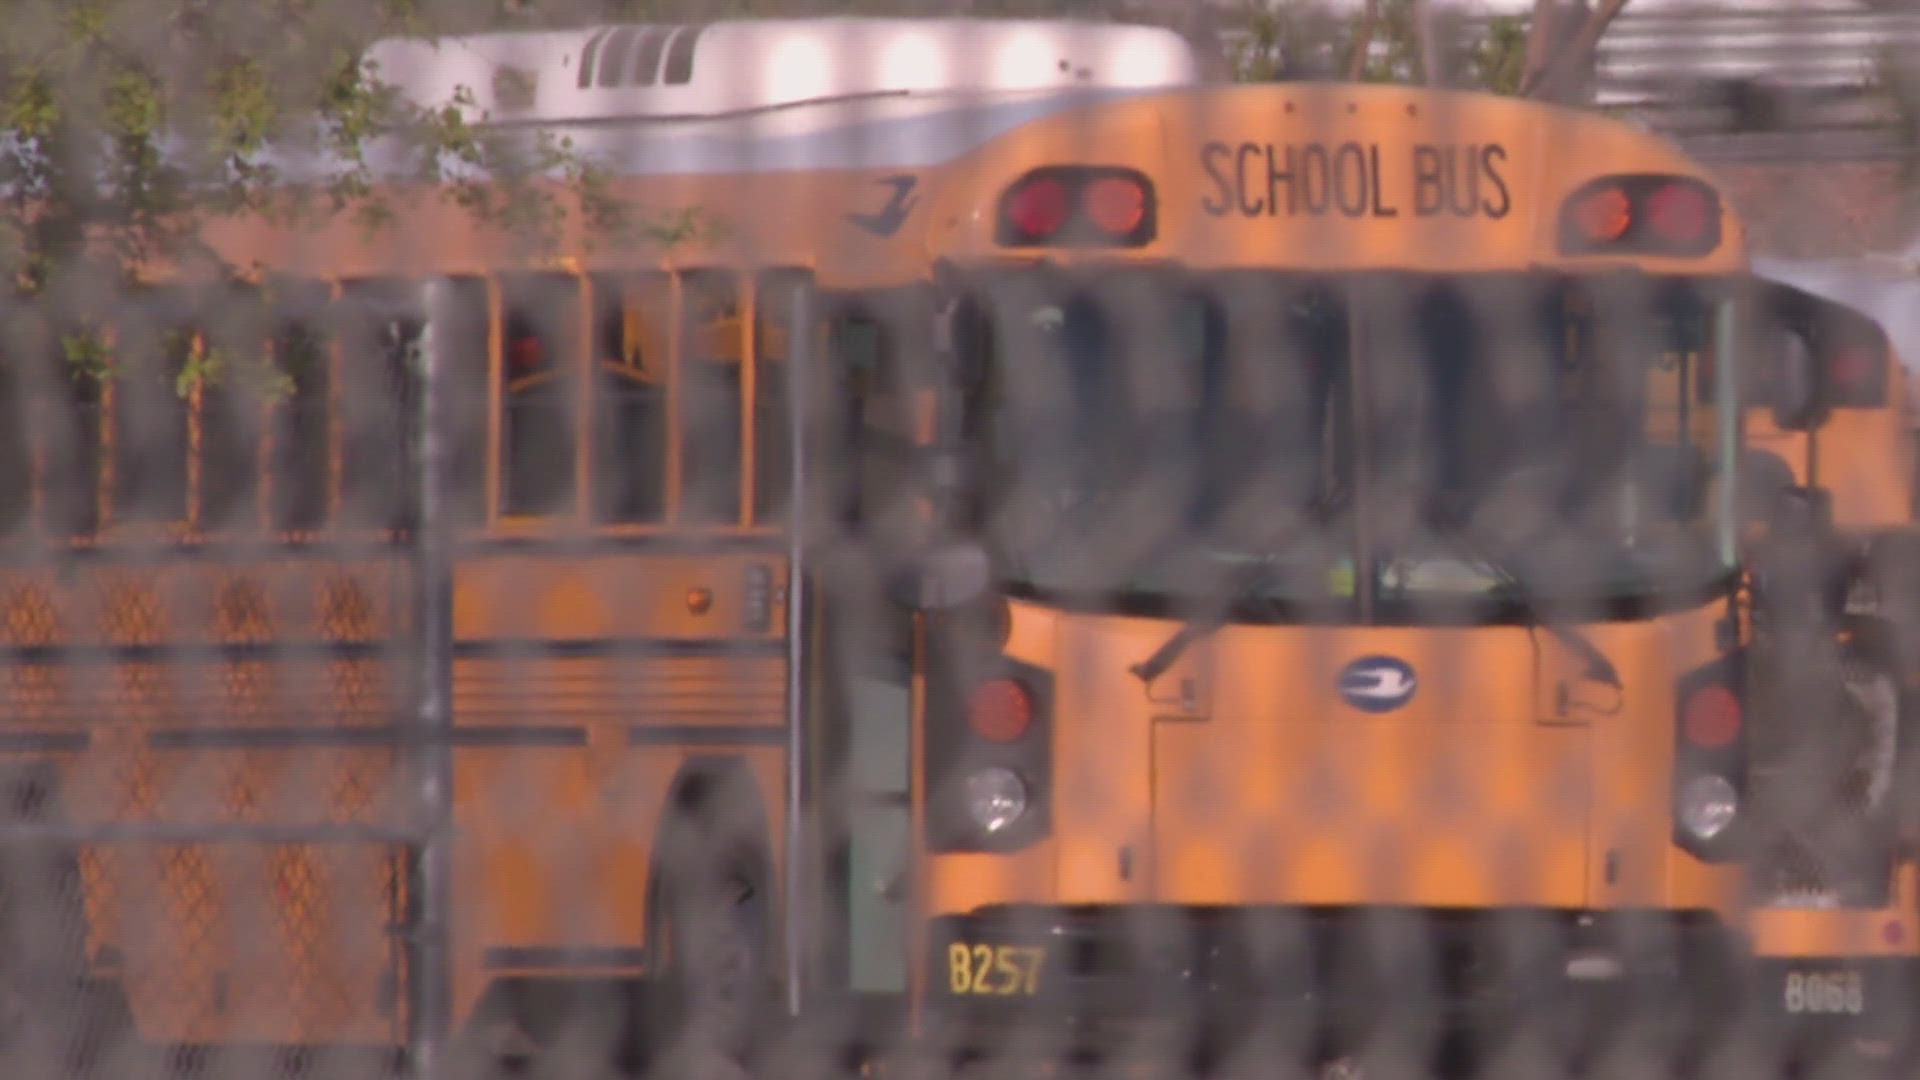 A bus aide is accused of attacking a non-verbal, autistic student in Peoria on a bus ride home. 12News spoke with the boy's father and has more disturbing details.